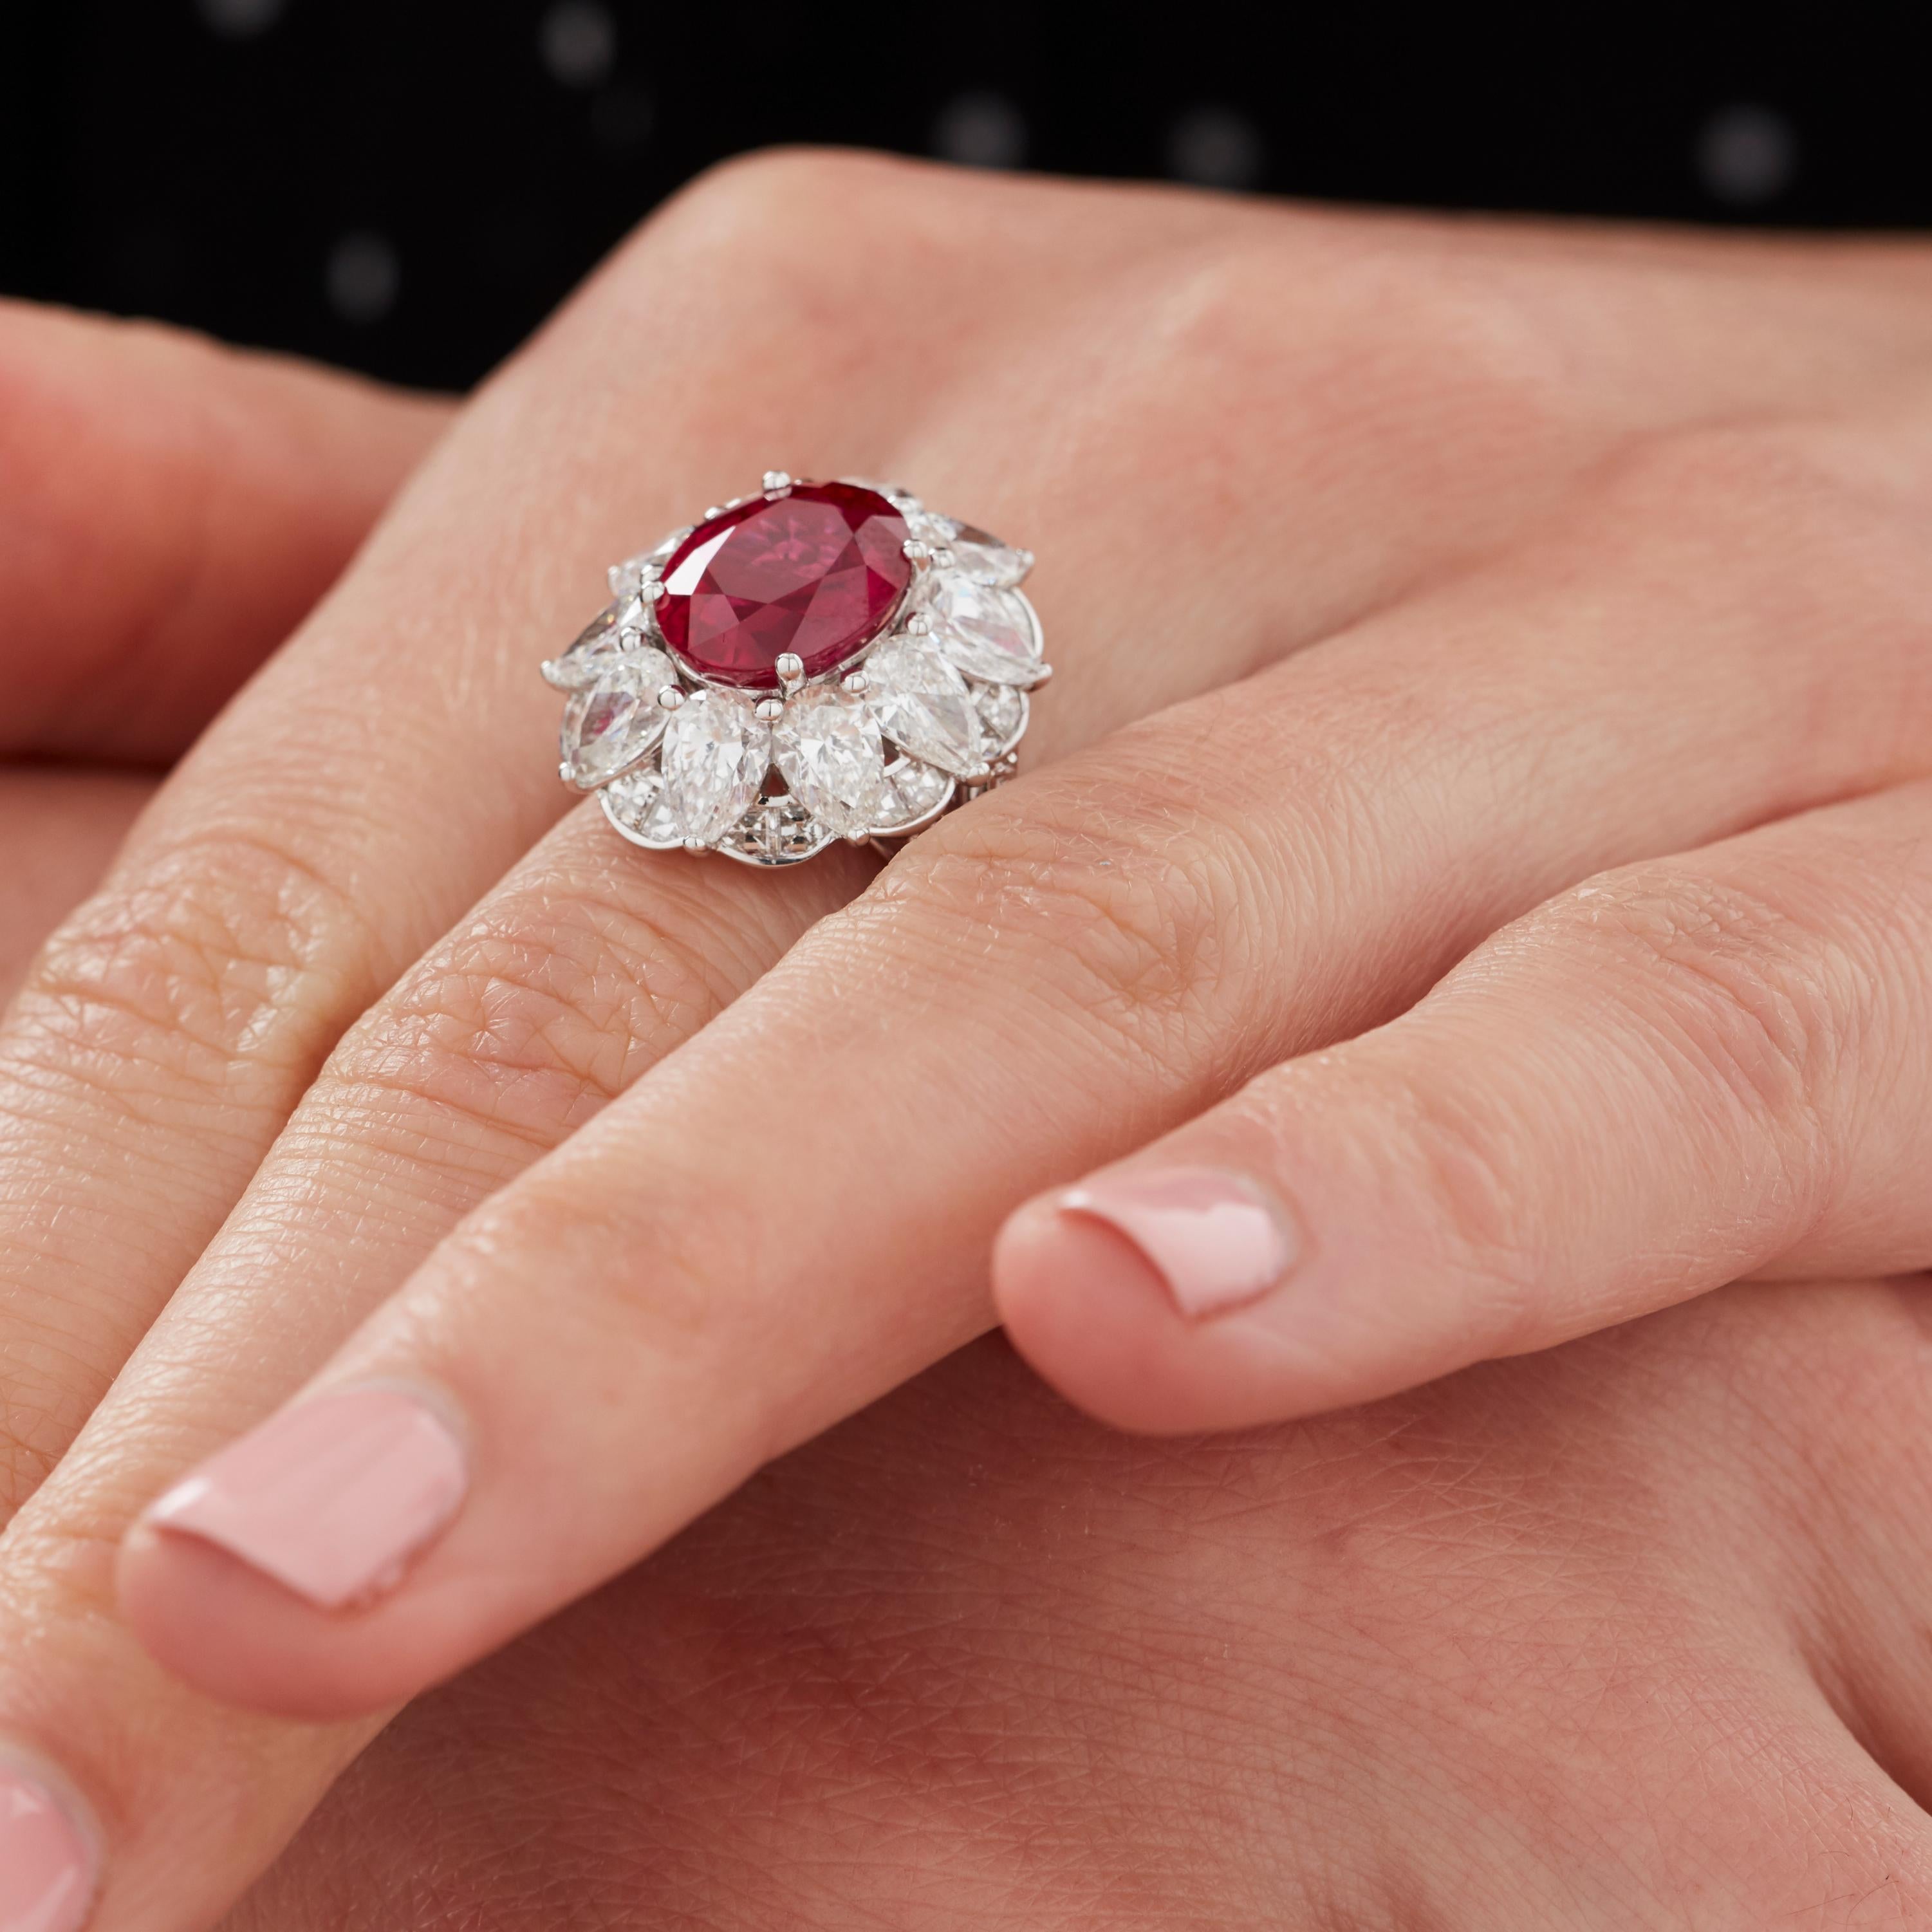 A House of Garrard 18 karat white gold 'Jewelled Vault' ring, set with round white diamonds and a central oval ruby.                                                                            

66 round white diamonds weighing 5.18ct                